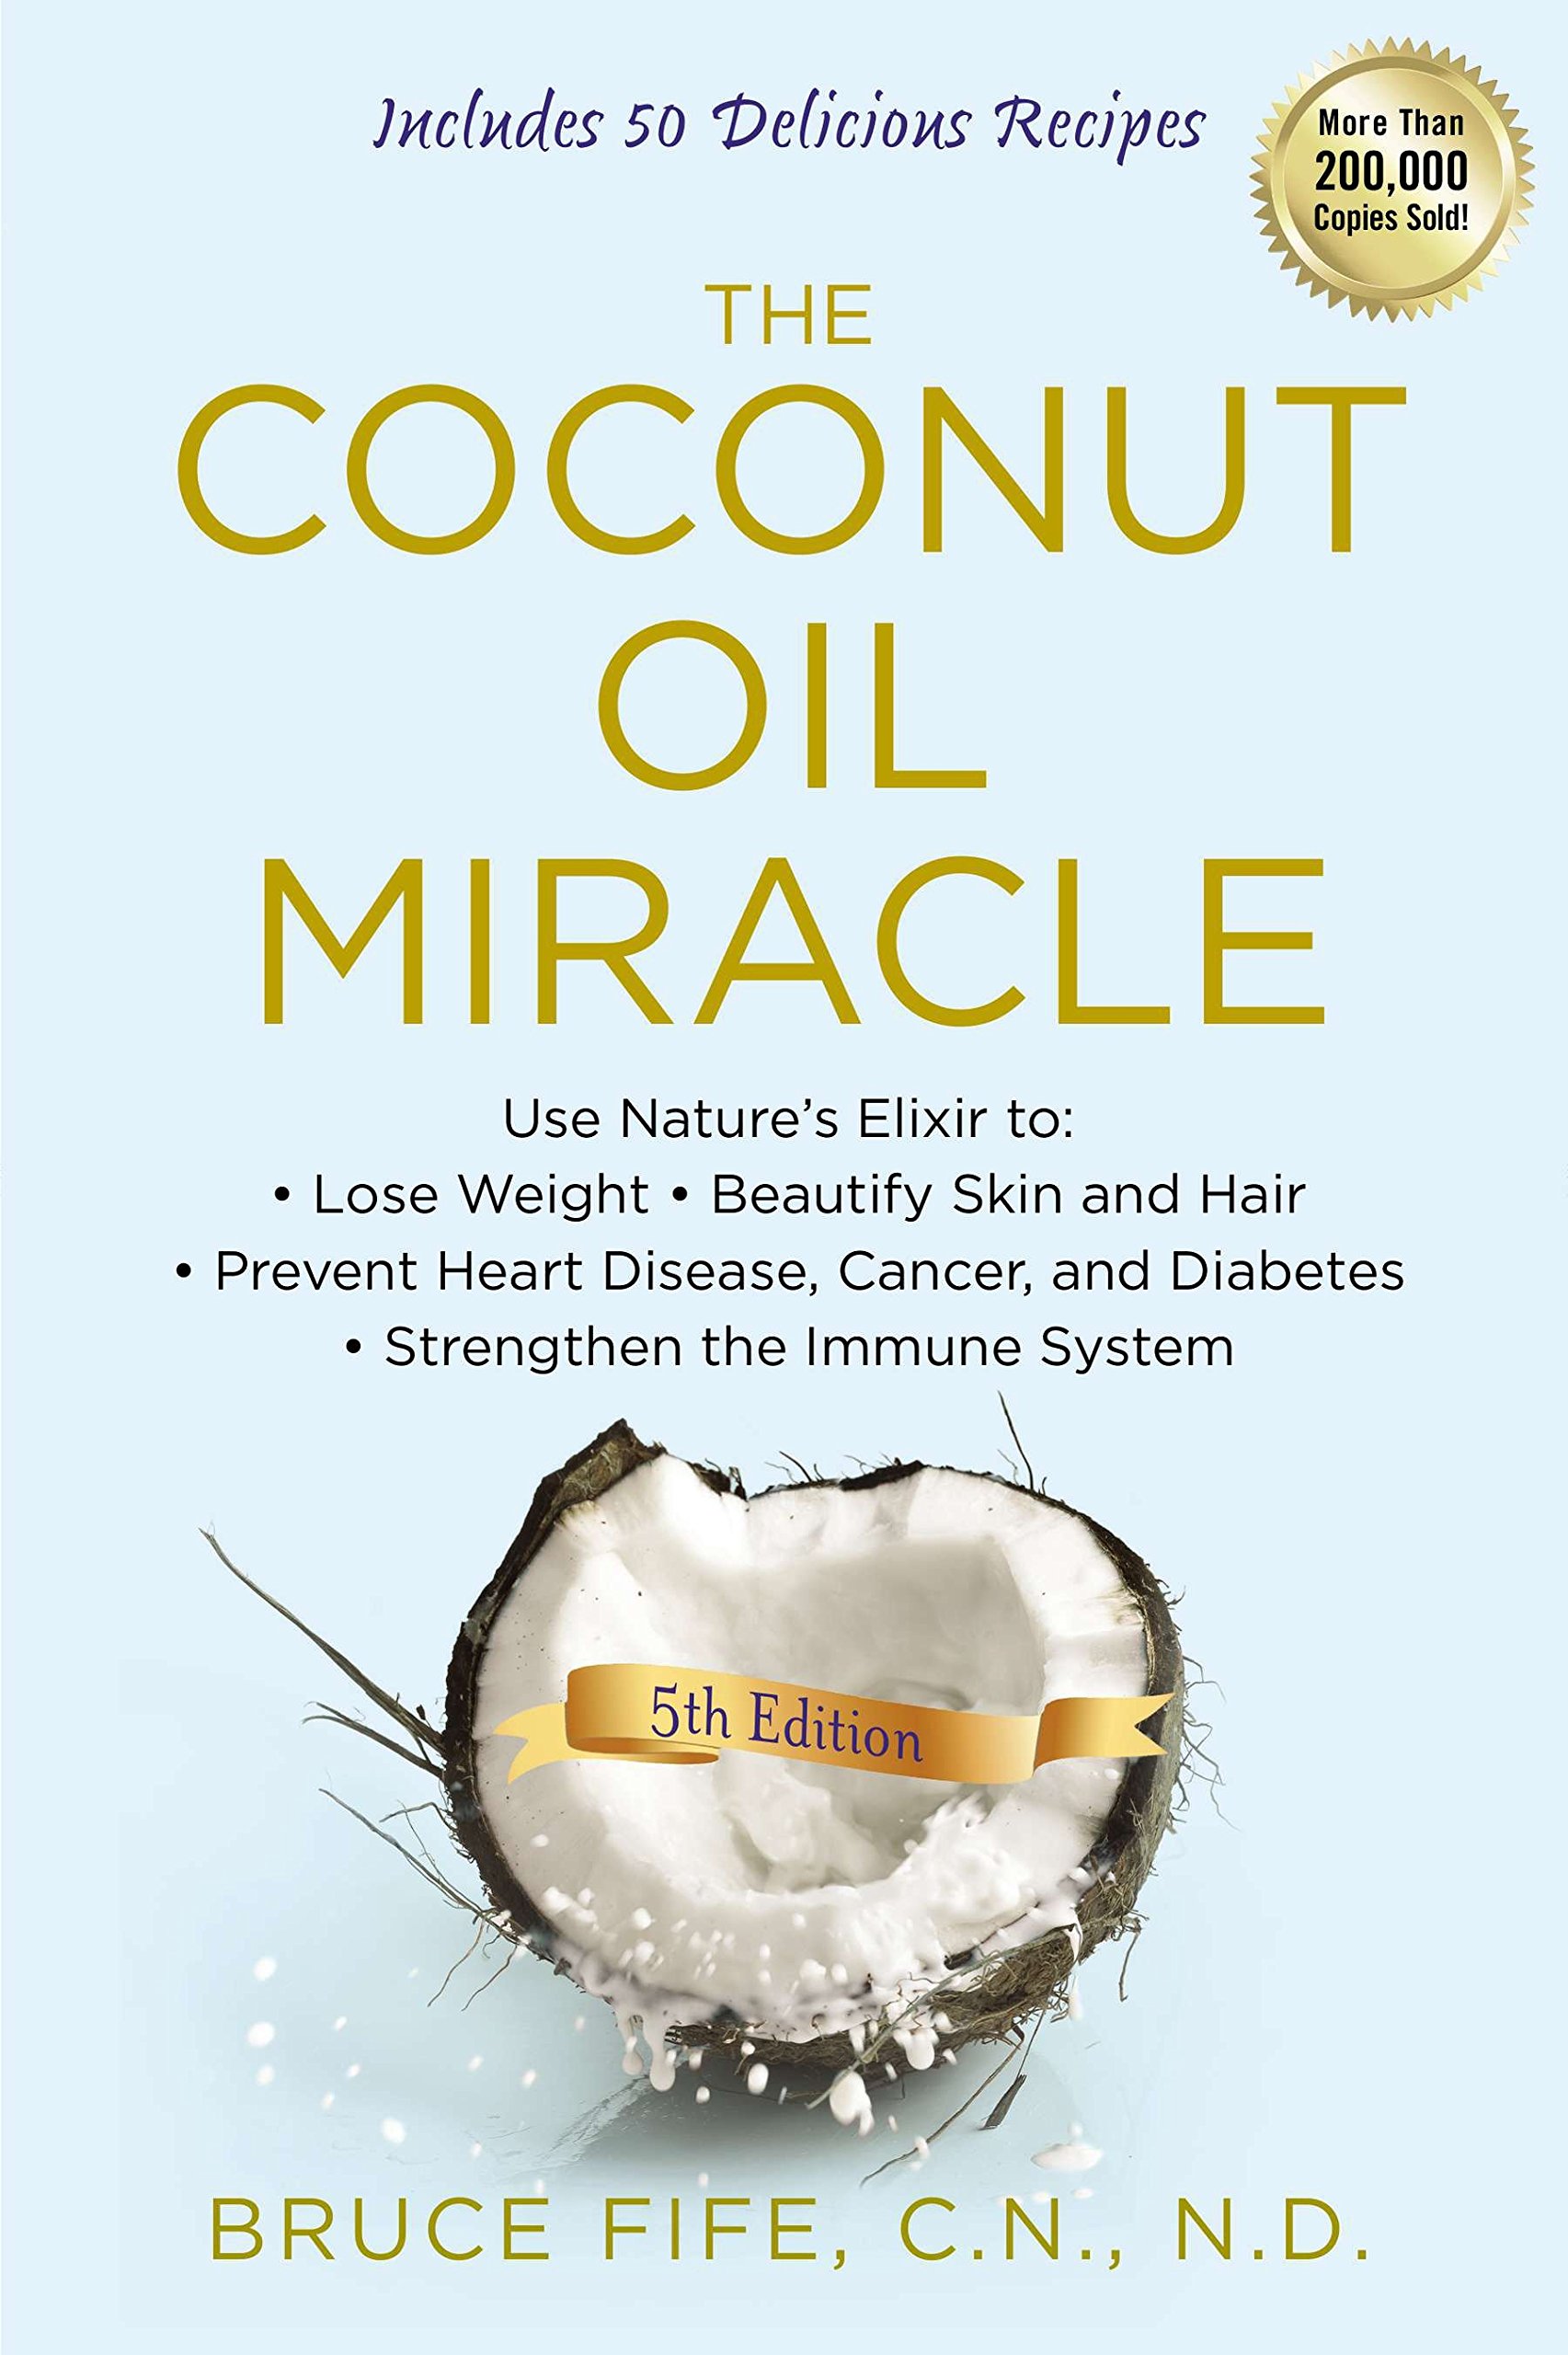 Book Cover The Coconut Oil Miracle: Use Nature's Elixir to Lose Weight, Beautify Skin and Hair, Prevent Heart Disease, Cancer, and Diabetes, Strengthen the Immune System, Fifth Edition